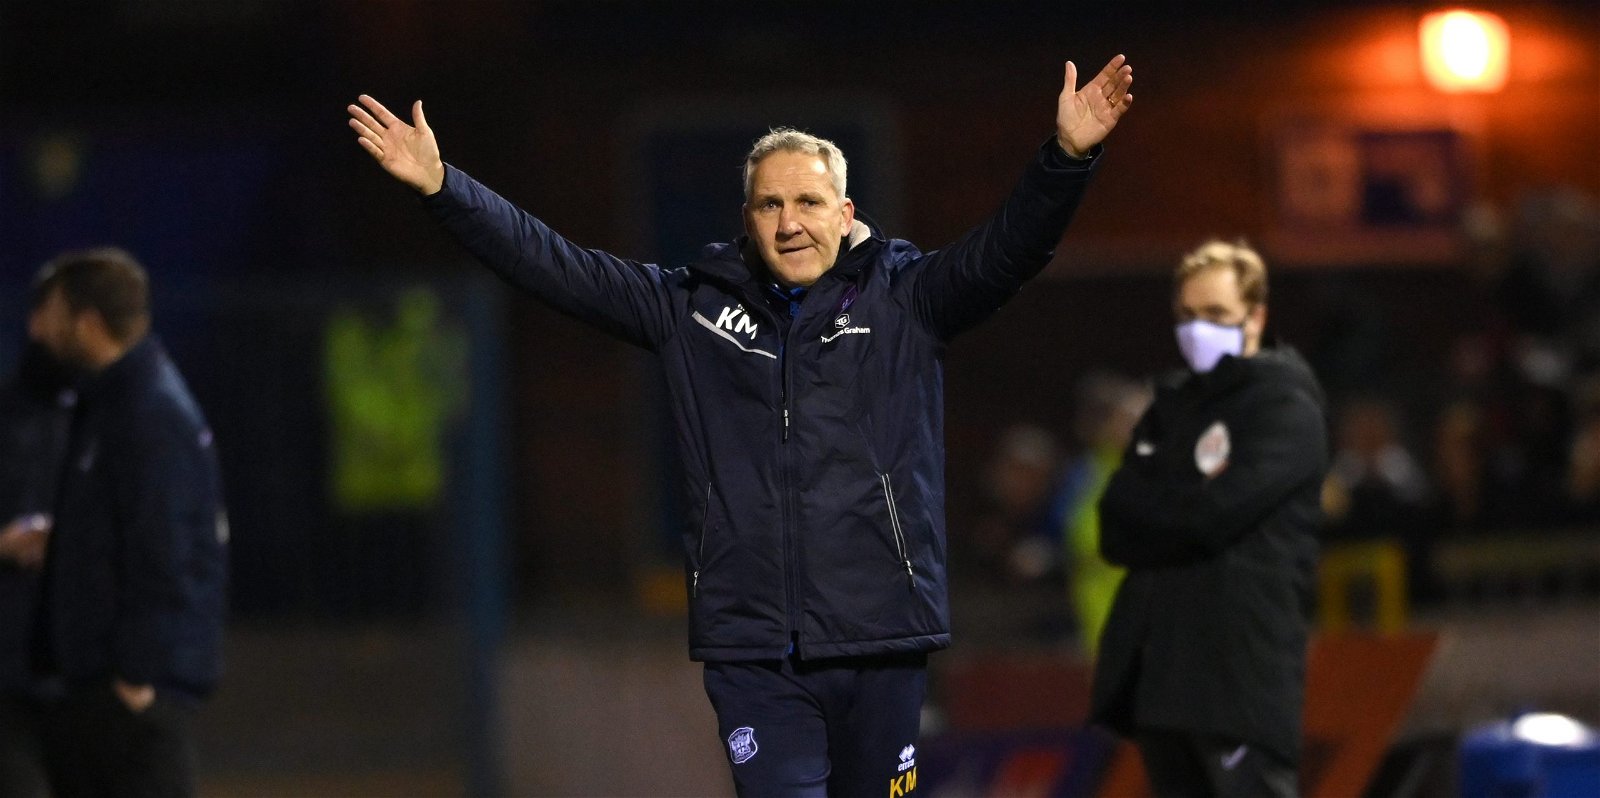 Carlisle United, Carlisle United confirm departure of manager Keith Millen